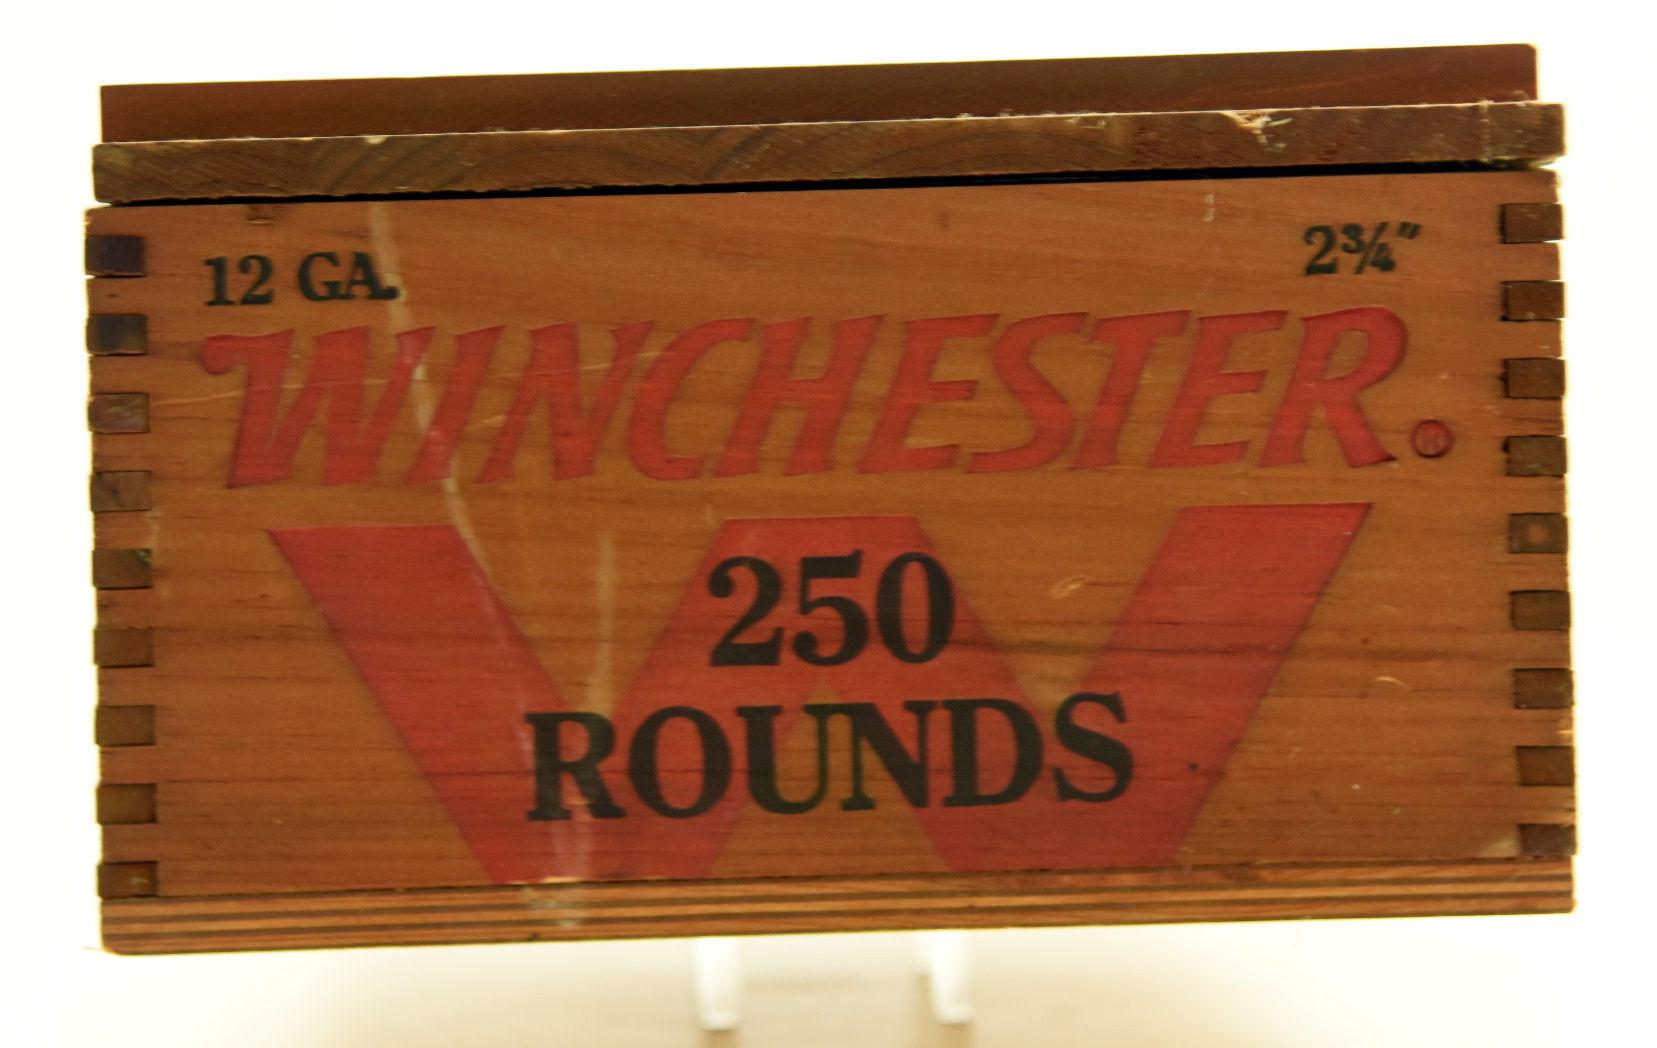 Lot #2021 - Winchester Small Arms Ammunition 12 gauge 2 ¾” 250 round wooden finger jointed ammo